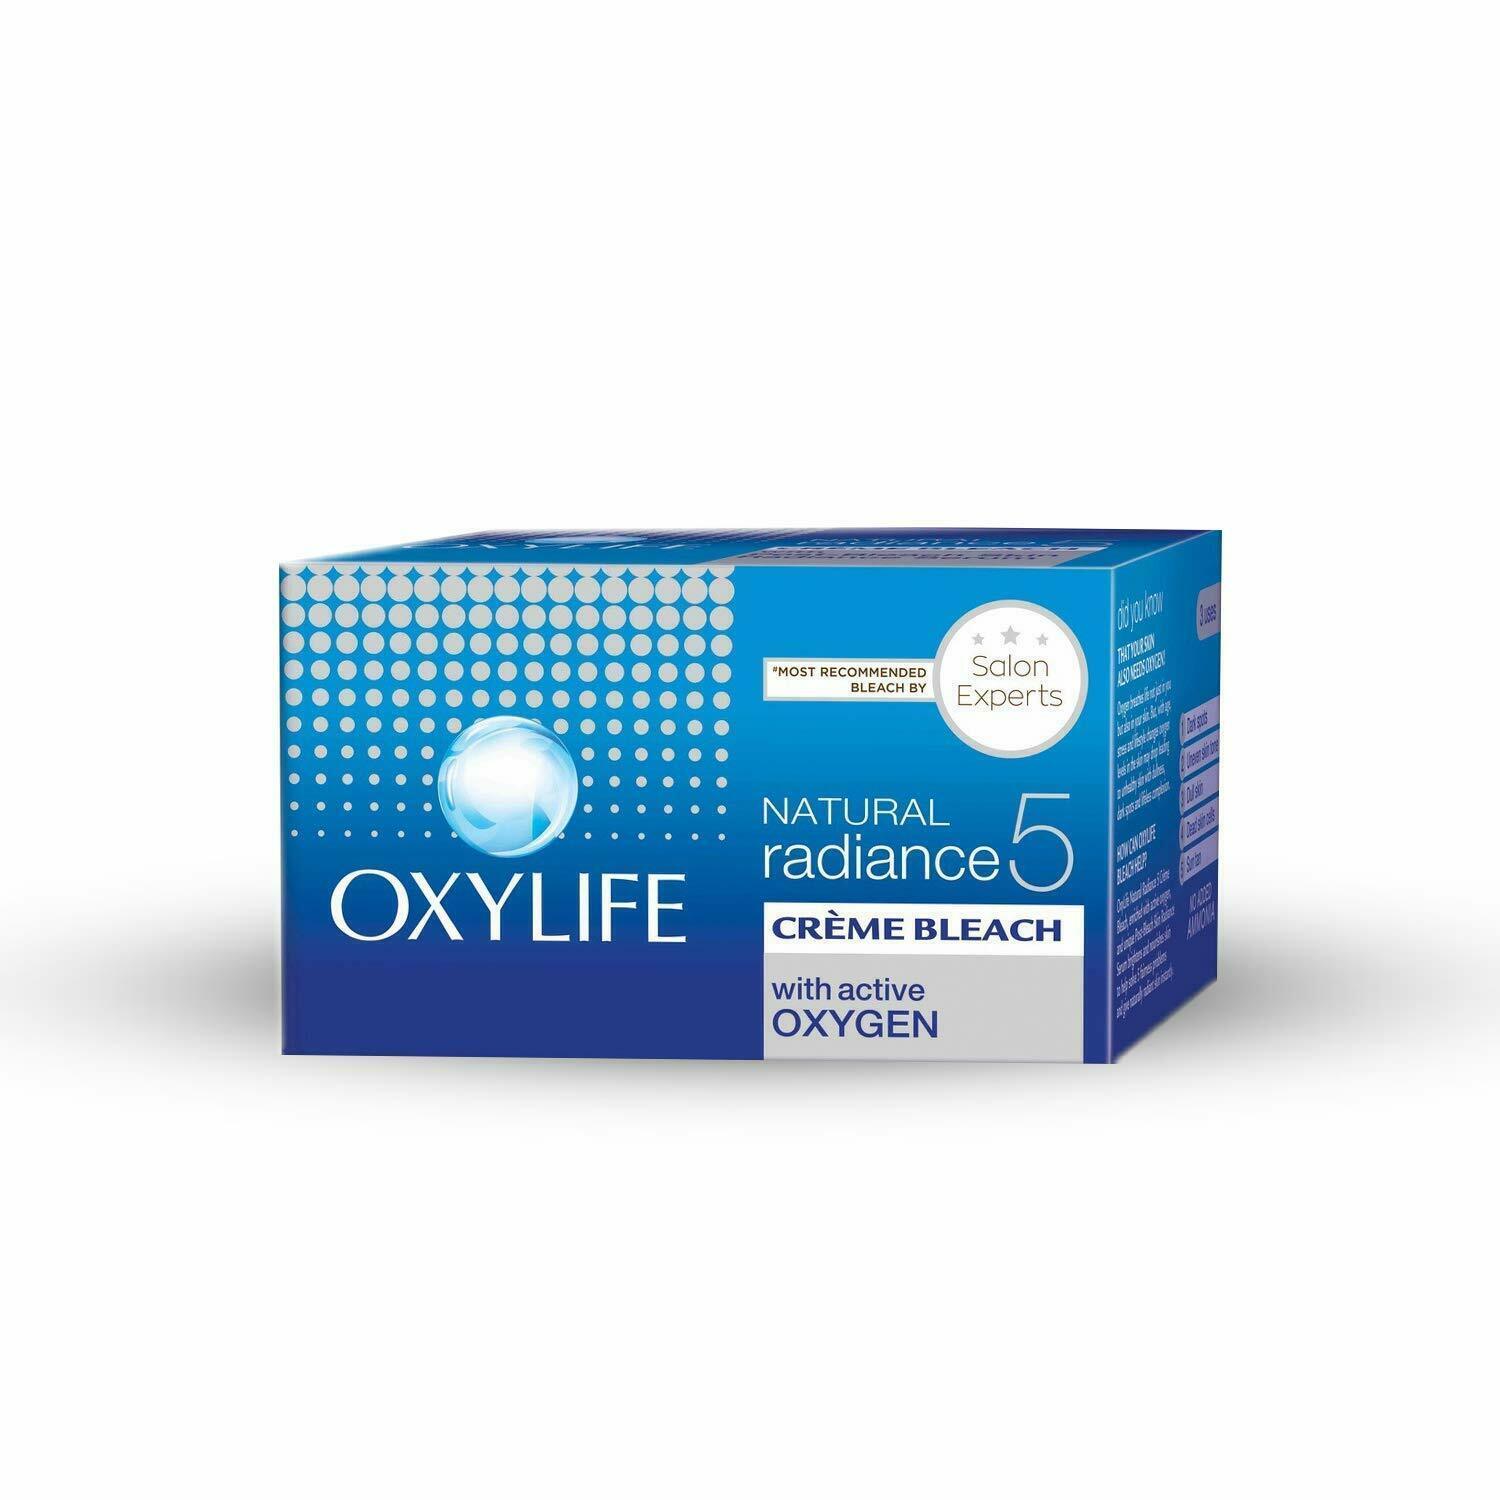 Oxylife Natural Radiance 5 Creme Bleach With Active Oxygen 310 gm | DHL Shippin - $26.09